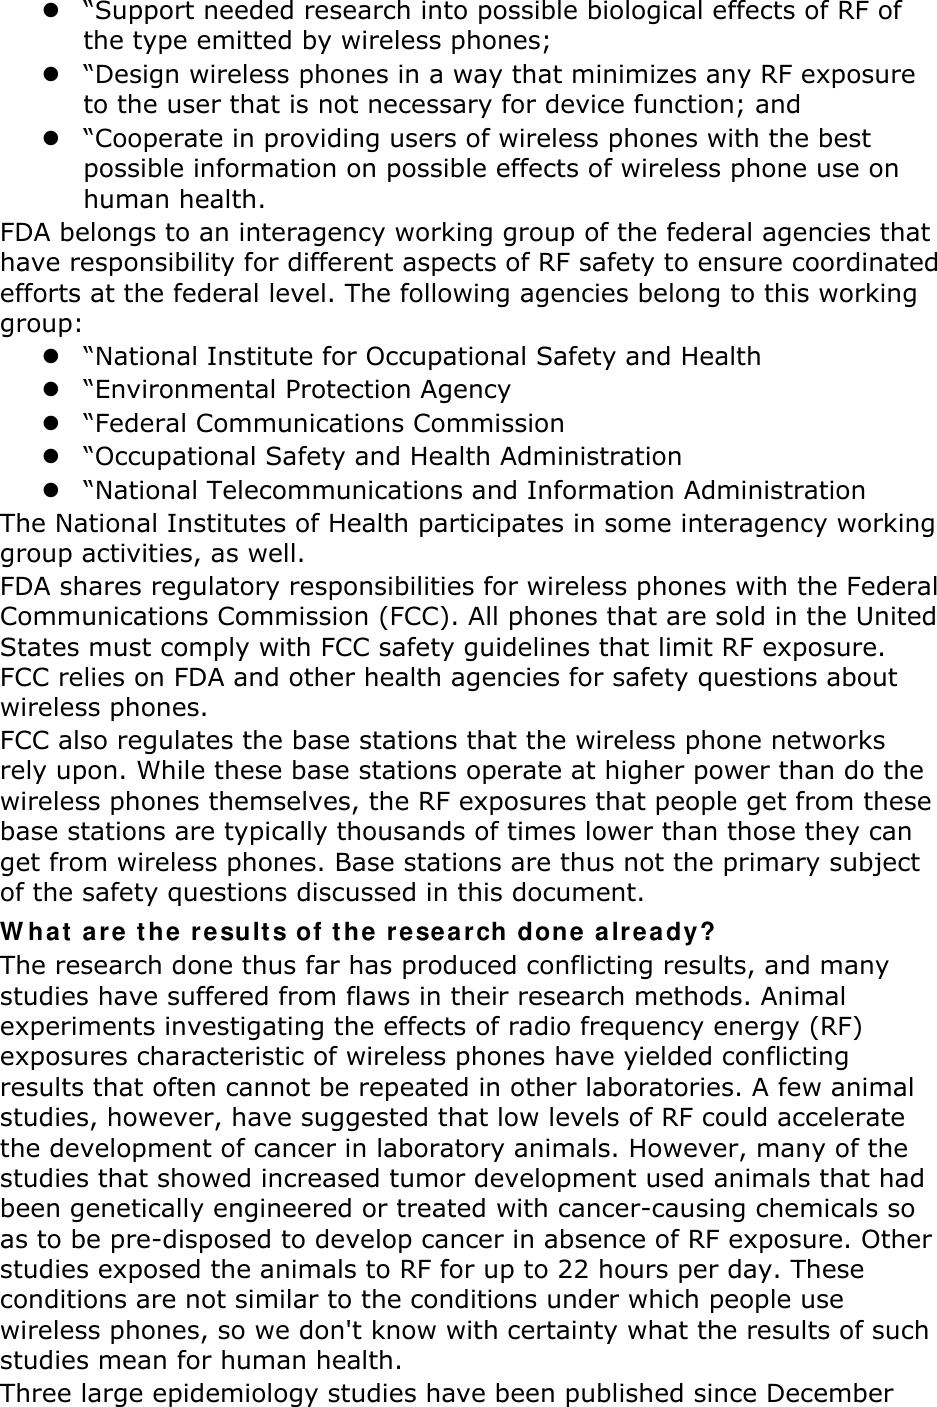  “Support needed research into possible biological effects of RF of the type emitted by wireless phones;  “Design wireless phones in a way that minimizes any RF exposure to the user that is not necessary for device function; and  “Cooperate in providing users of wireless phones with the best possible information on possible effects of wireless phone use on human health. FDA belongs to an interagency working group of the federal agencies that have responsibility for different aspects of RF safety to ensure coordinated efforts at the federal level. The following agencies belong to this working group:  “National Institute for Occupational Safety and Health  “Environmental Protection Agency  “Federal Communications Commission  “Occupational Safety and Health Administration  “National Telecommunications and Information Administration The National Institutes of Health participates in some interagency working group activities, as well. FDA shares regulatory responsibilities for wireless phones with the Federal Communications Commission (FCC). All phones that are sold in the United States must comply with FCC safety guidelines that limit RF exposure. FCC relies on FDA and other health agencies for safety questions about wireless phones. FCC also regulates the base stations that the wireless phone networks rely upon. While these base stations operate at higher power than do the wireless phones themselves, the RF exposures that people get from these base stations are typically thousands of times lower than those they can get from wireless phones. Base stations are thus not the primary subject of the safety questions discussed in this document. W hat ar e the resu lts of t he research done already? The research done thus far has produced conflicting results, and many studies have suffered from flaws in their research methods. Animal experiments investigating the effects of radio frequency energy (RF) exposures characteristic of wireless phones have yielded conflicting results that often cannot be repeated in other laboratories. A few animal studies, however, have suggested that low levels of RF could accelerate the development of cancer in laboratory animals. However, many of the studies that showed increased tumor development used animals that had been genetically engineered or treated with cancer-causing chemicals so as to be pre-disposed to develop cancer in absence of RF exposure. Other studies exposed the animals to RF for up to 22 hours per day. These conditions are not similar to the conditions under which people use wireless phones, so we don&apos;t know with certainty what the results of such studies mean for human health. Three large epidemiology studies have been published since December 